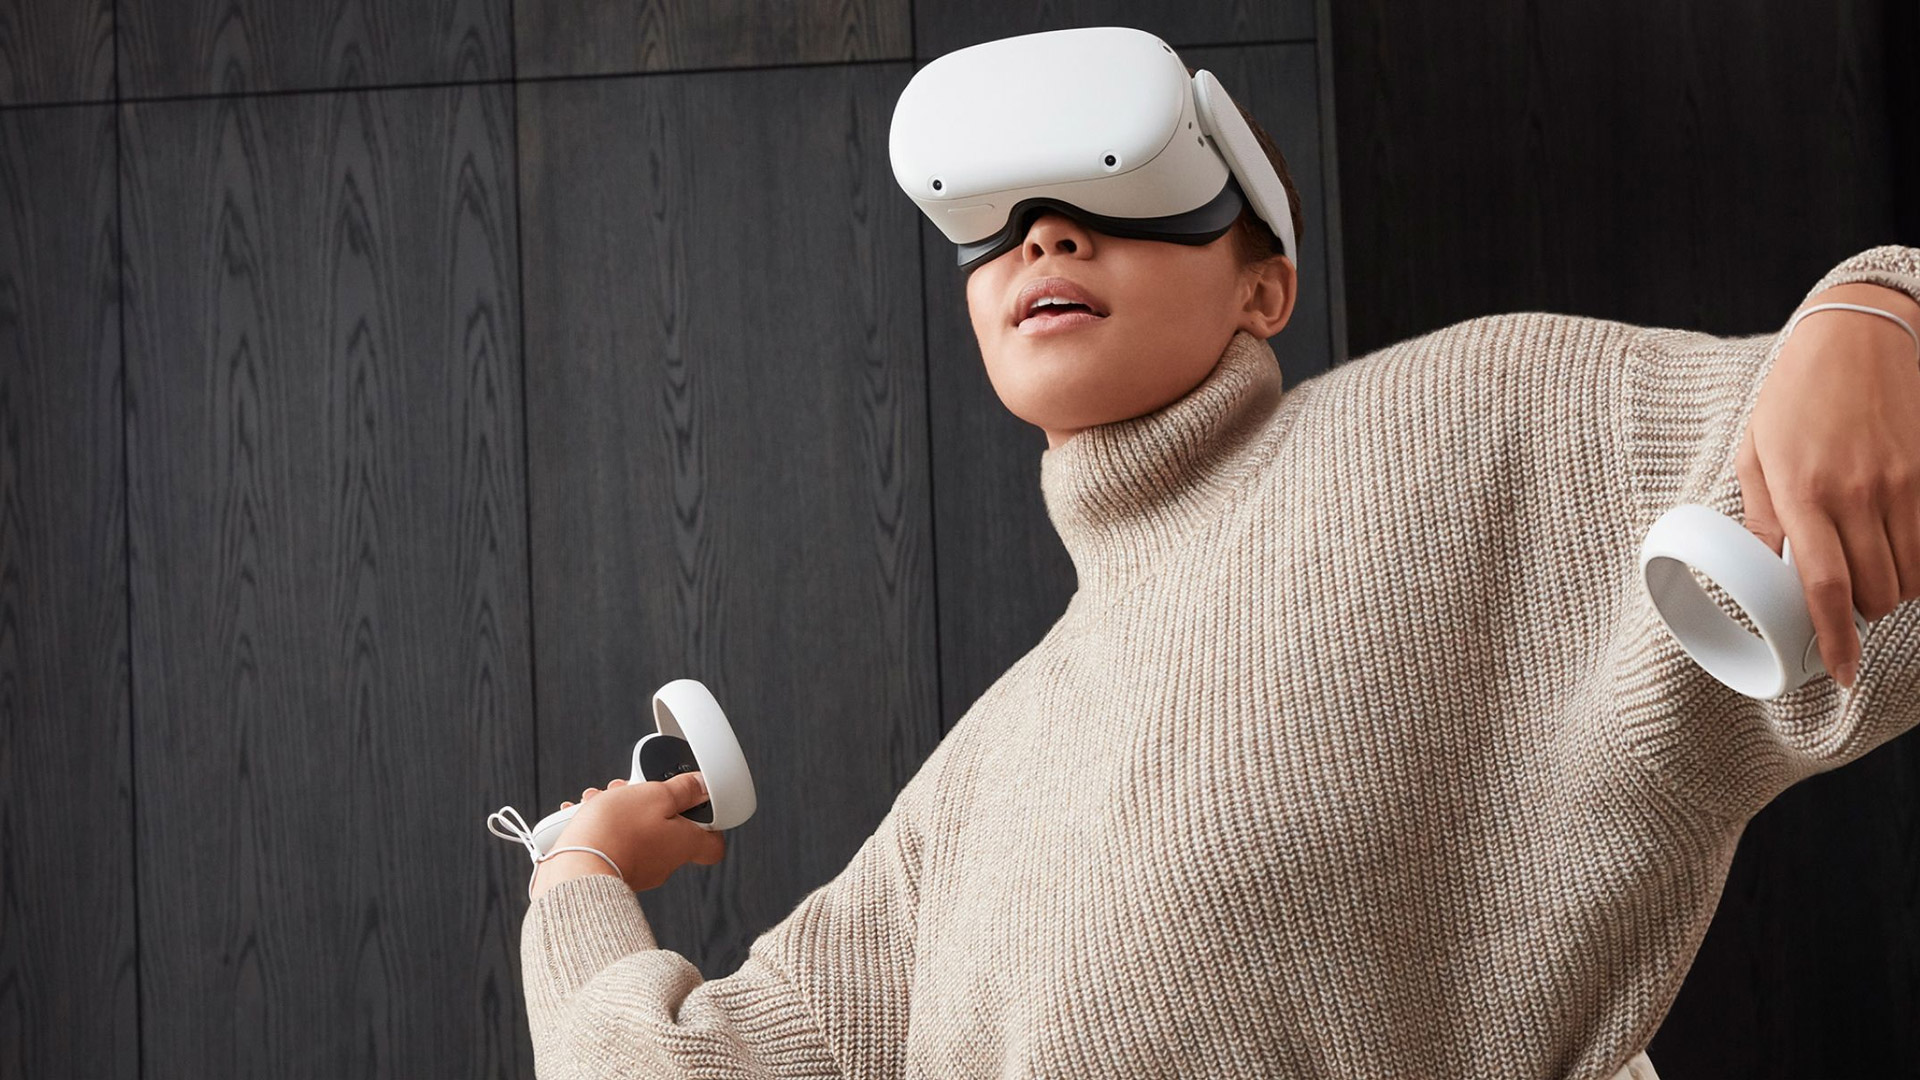 A woman wearing a turtleneck sweater plays with a Meta Quest 2 headset